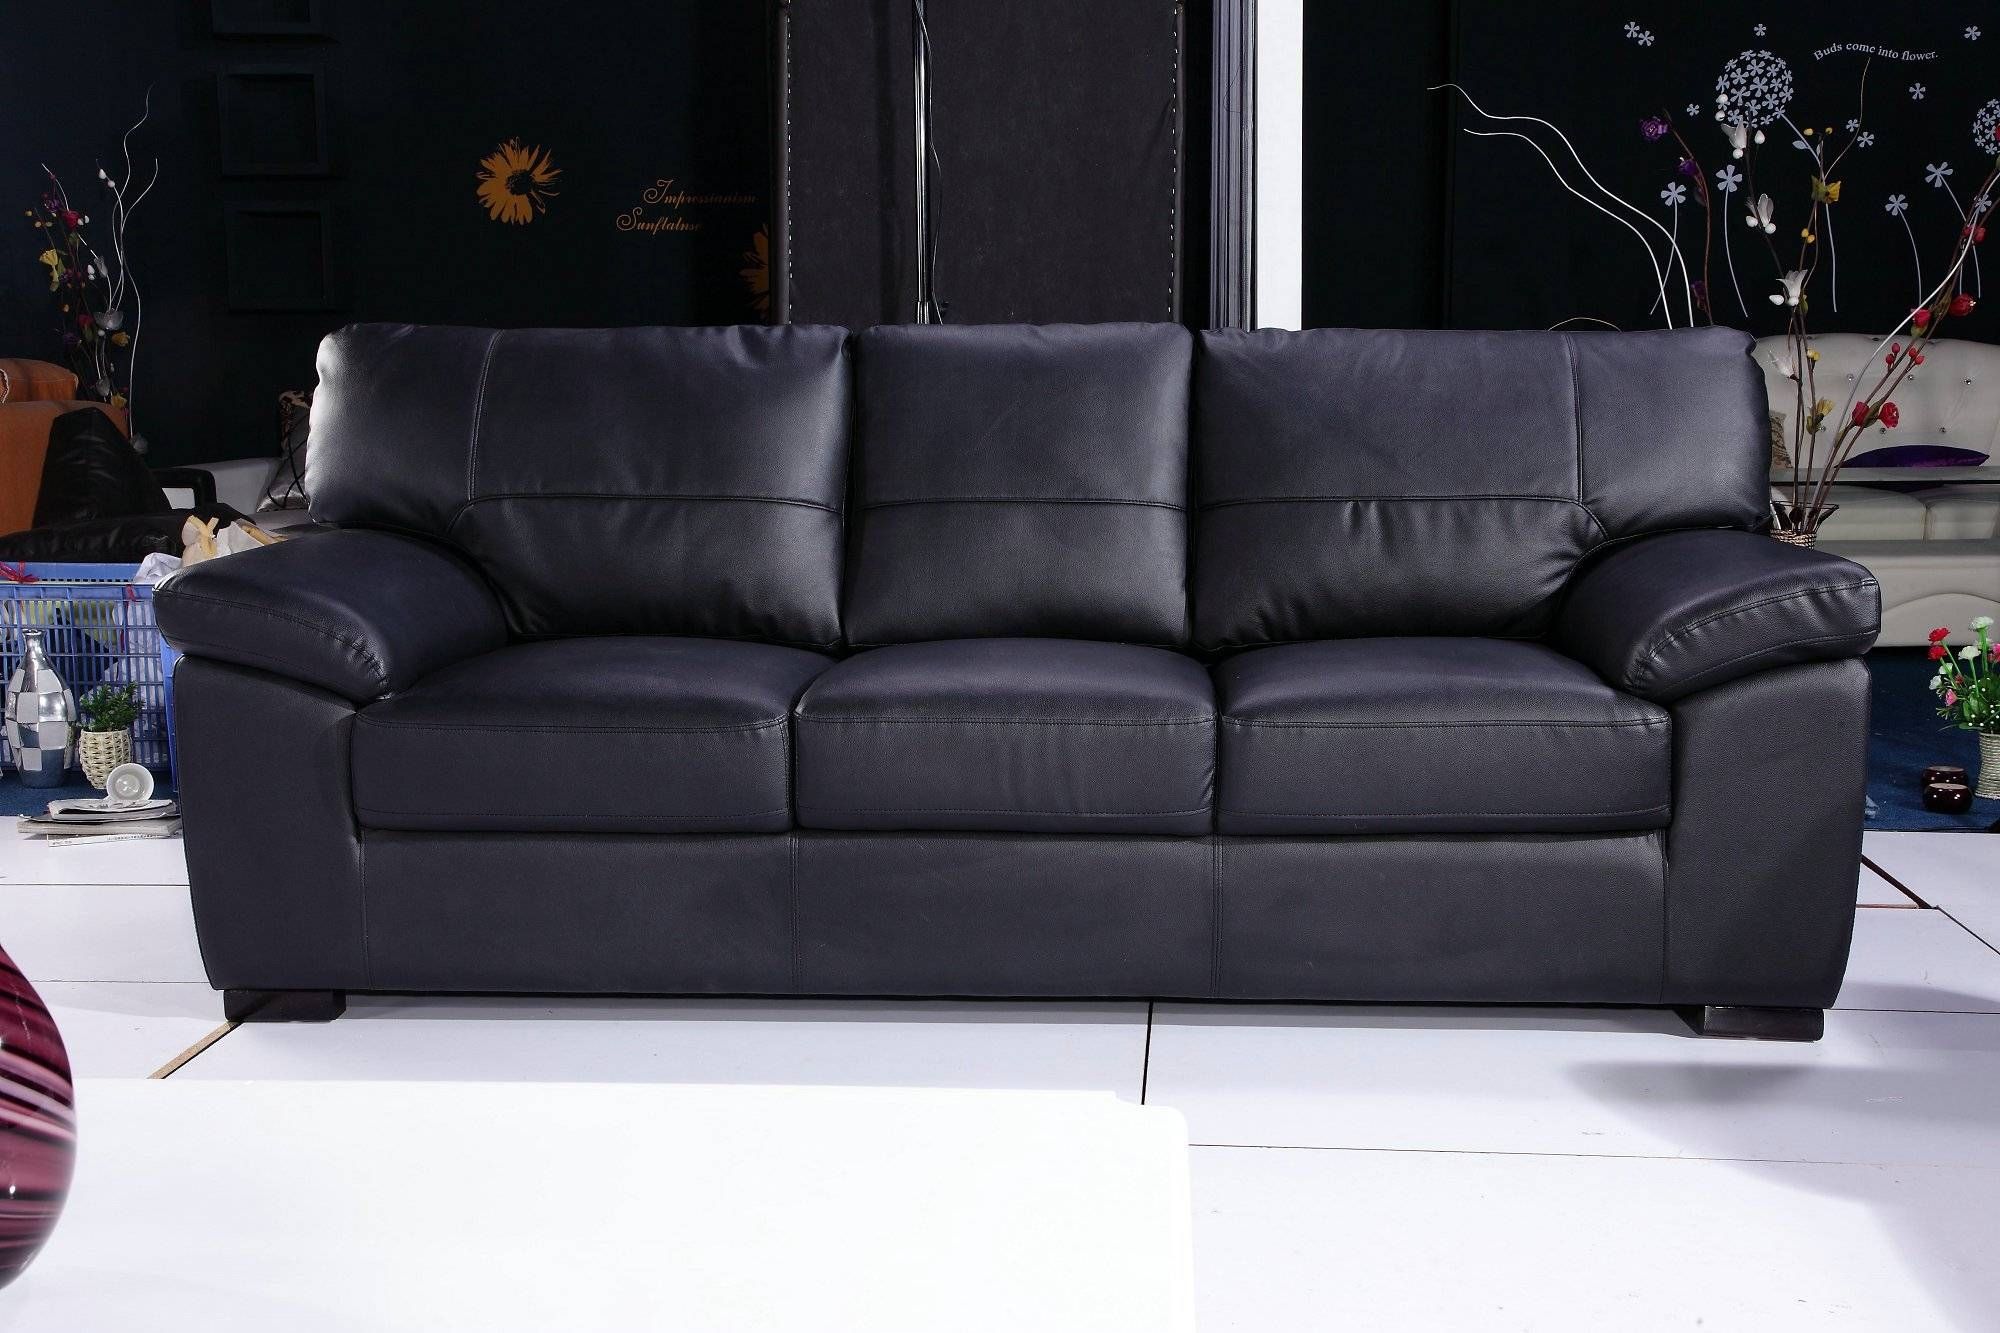 Sofa : 3 Seater Leather Sofa Recliner Home Style Tips Unique At 3 Intended For 3 Seater Leather Sofas (View 1 of 30)